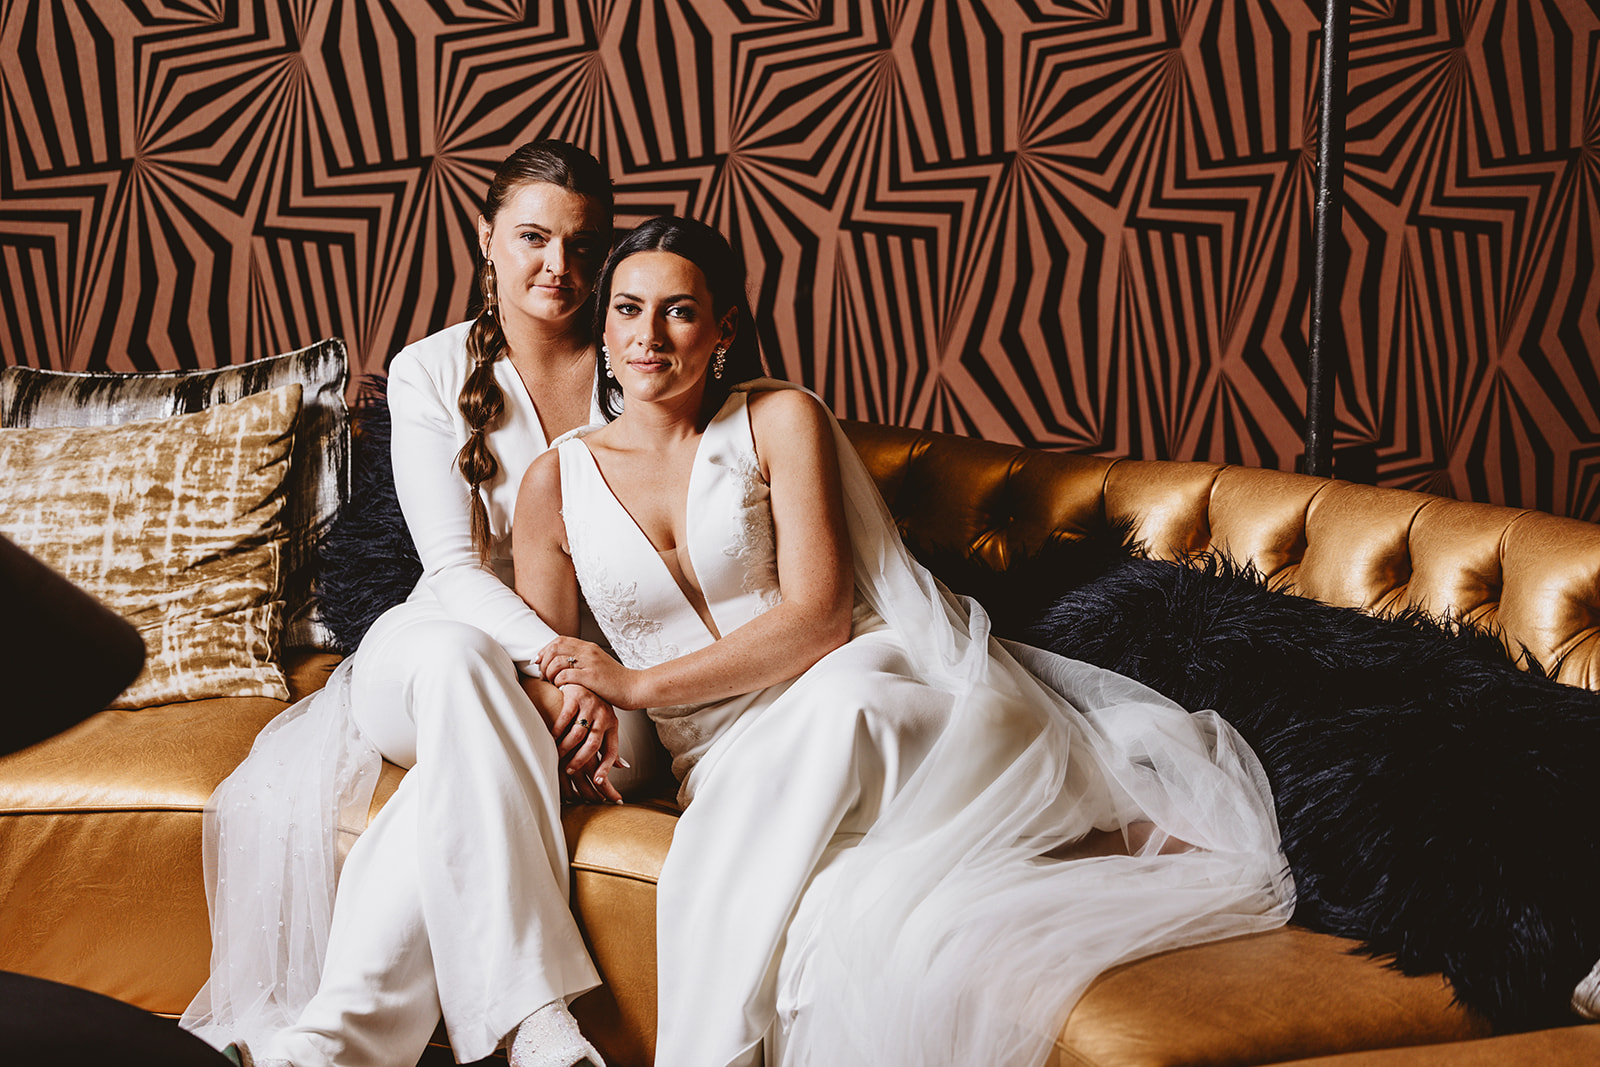 Two Brides get married on New Years Eve